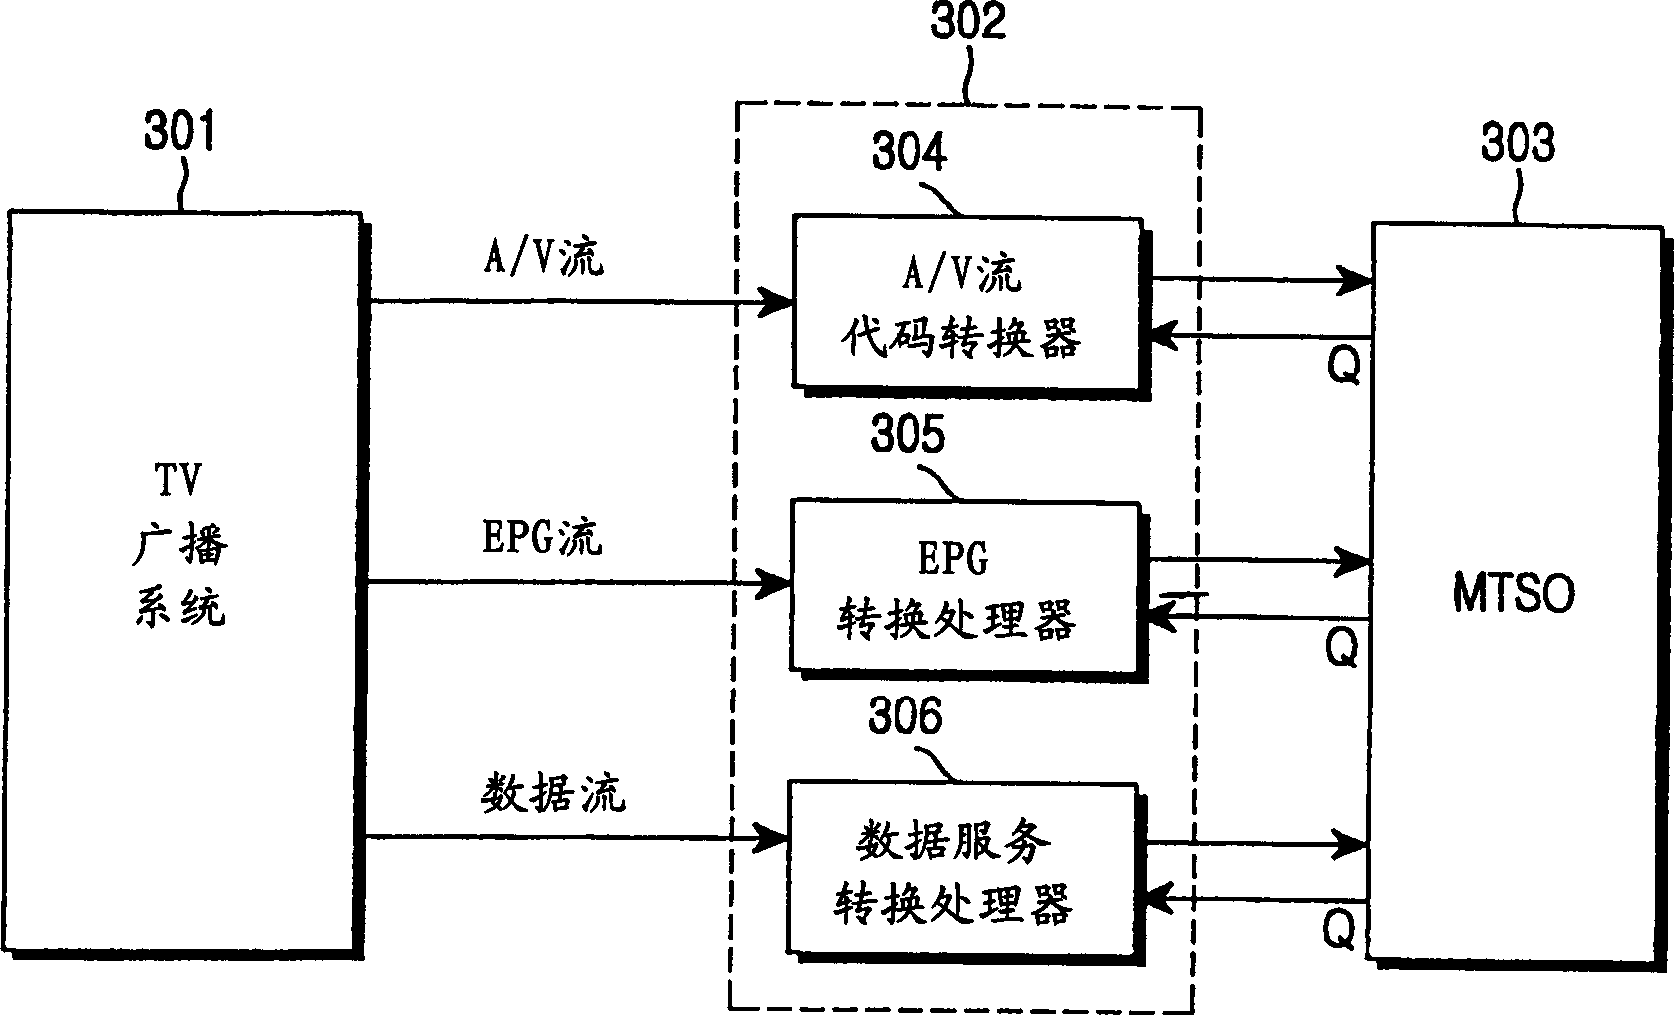 Apparatus and method for providing TV broadcasting service in mobile communication system